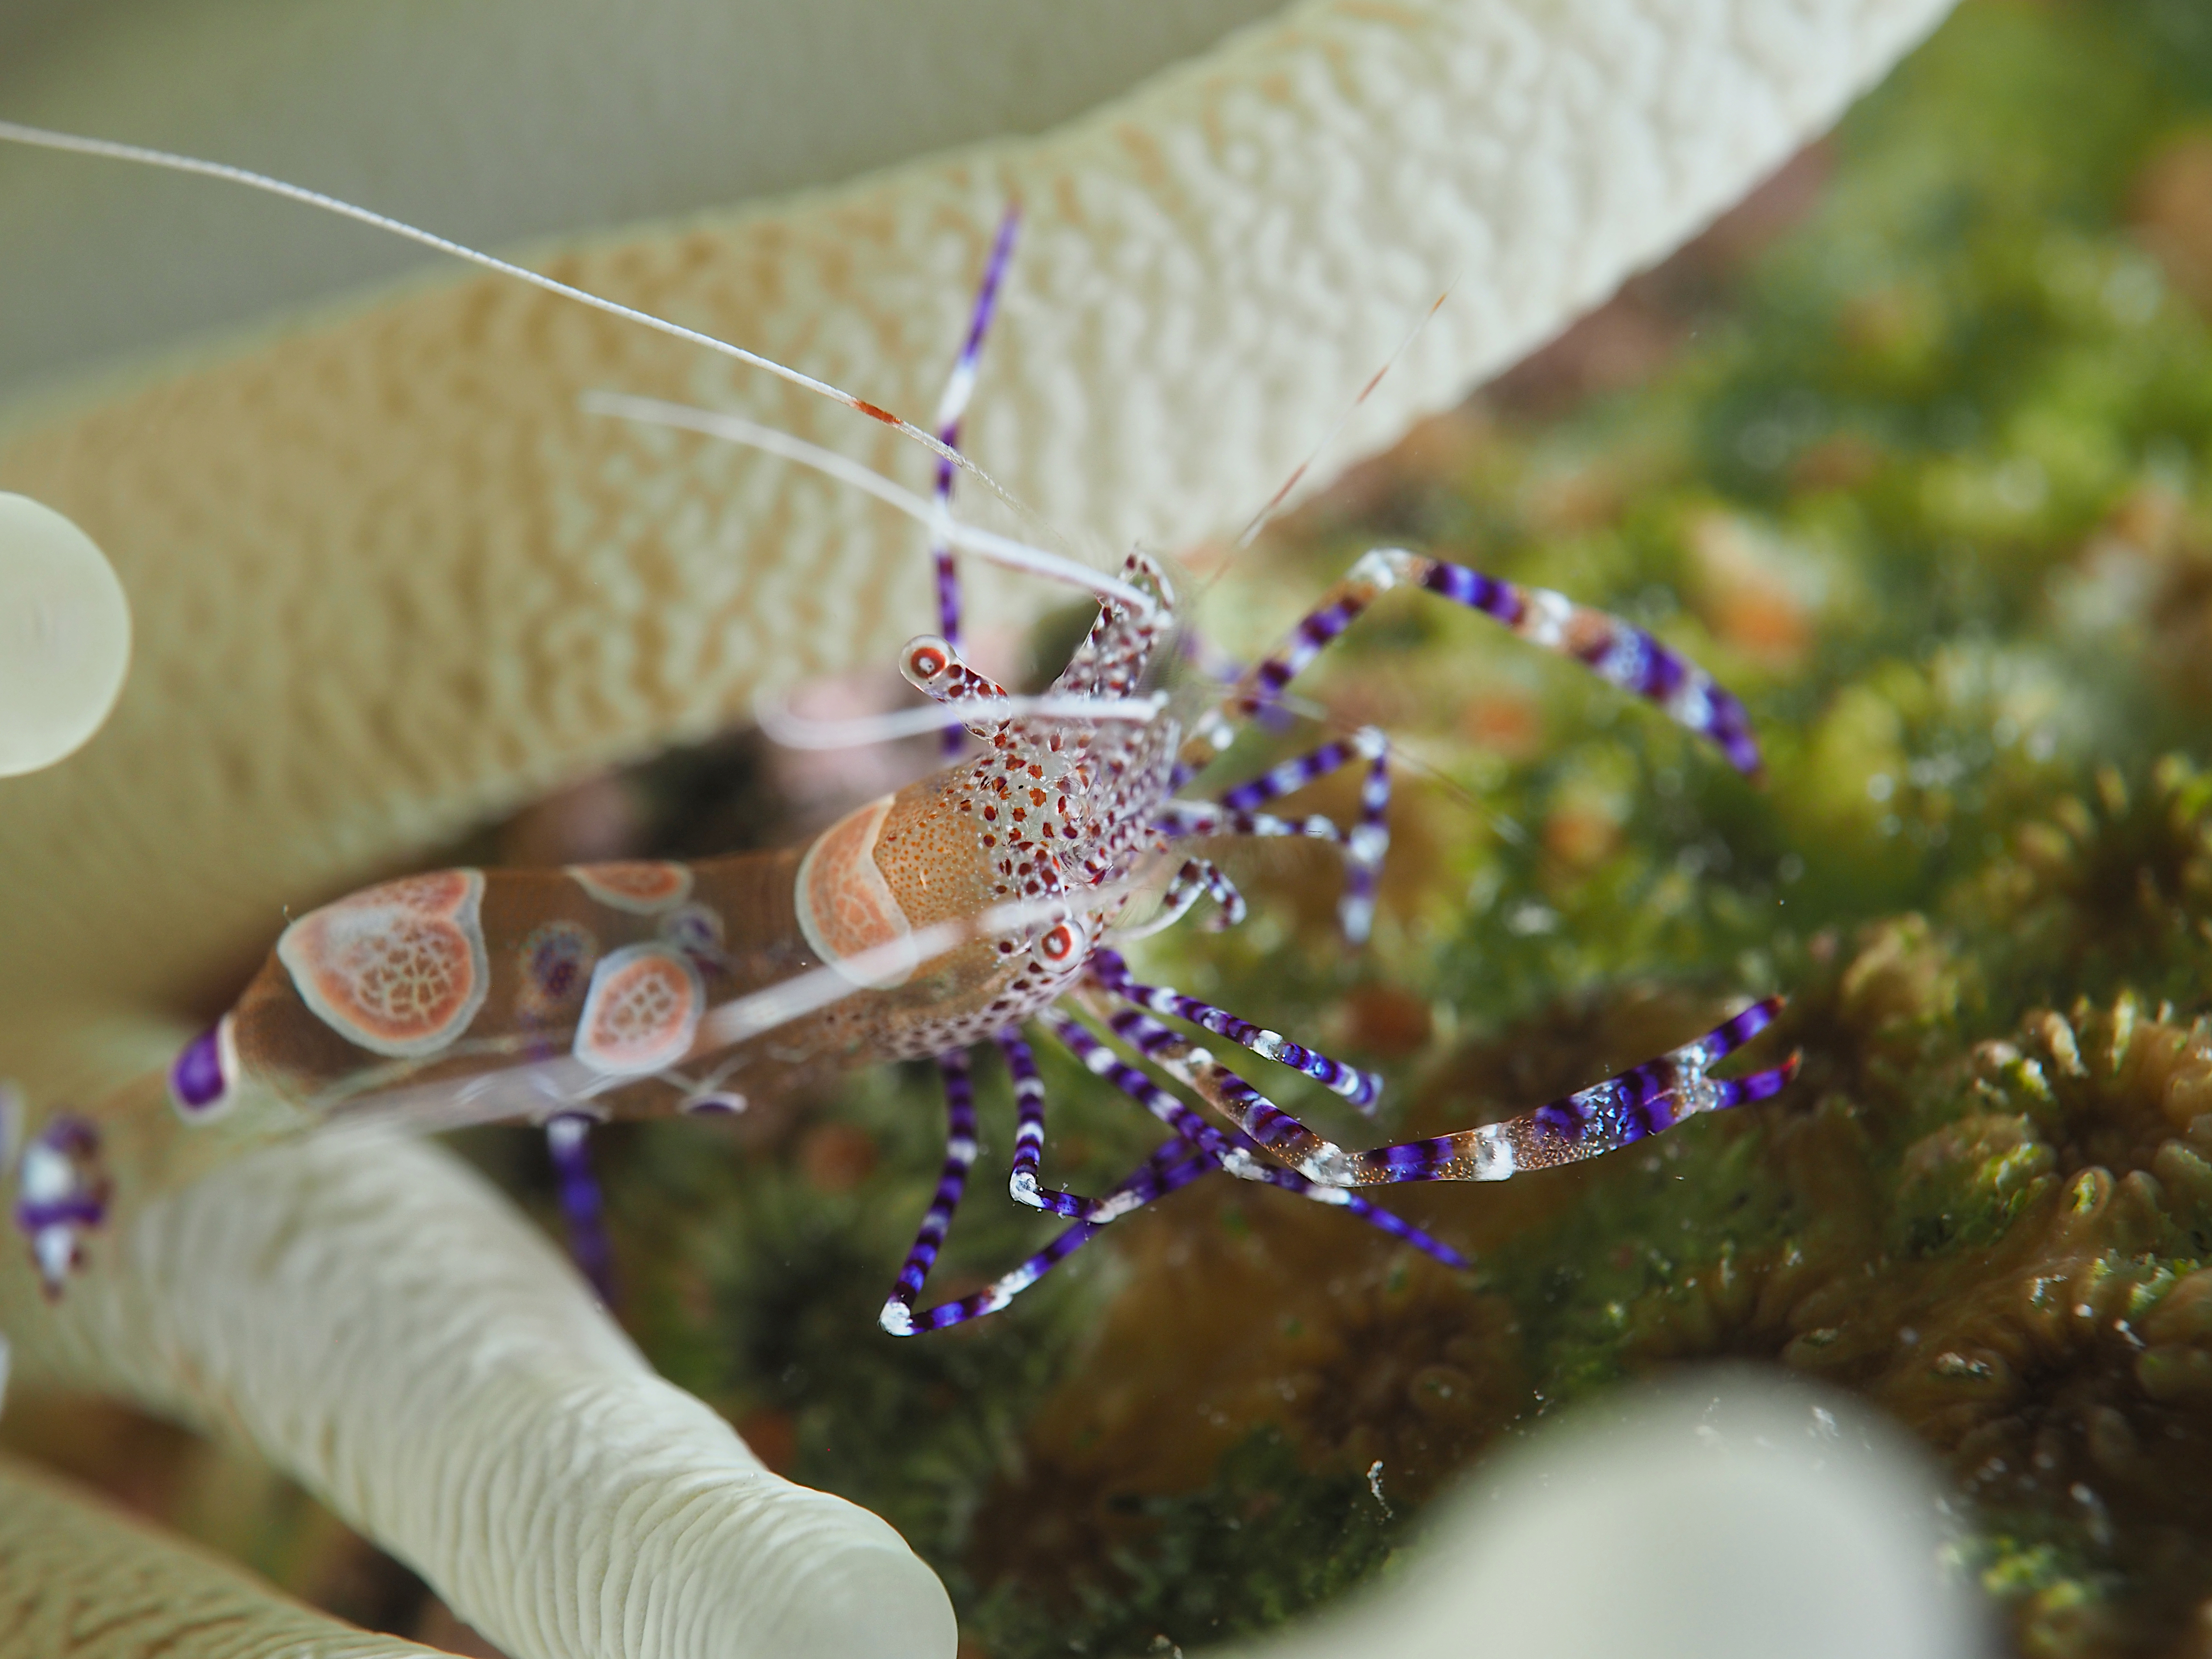 Spotted Cleaner Shrimp - Periclimenes yucatanicus